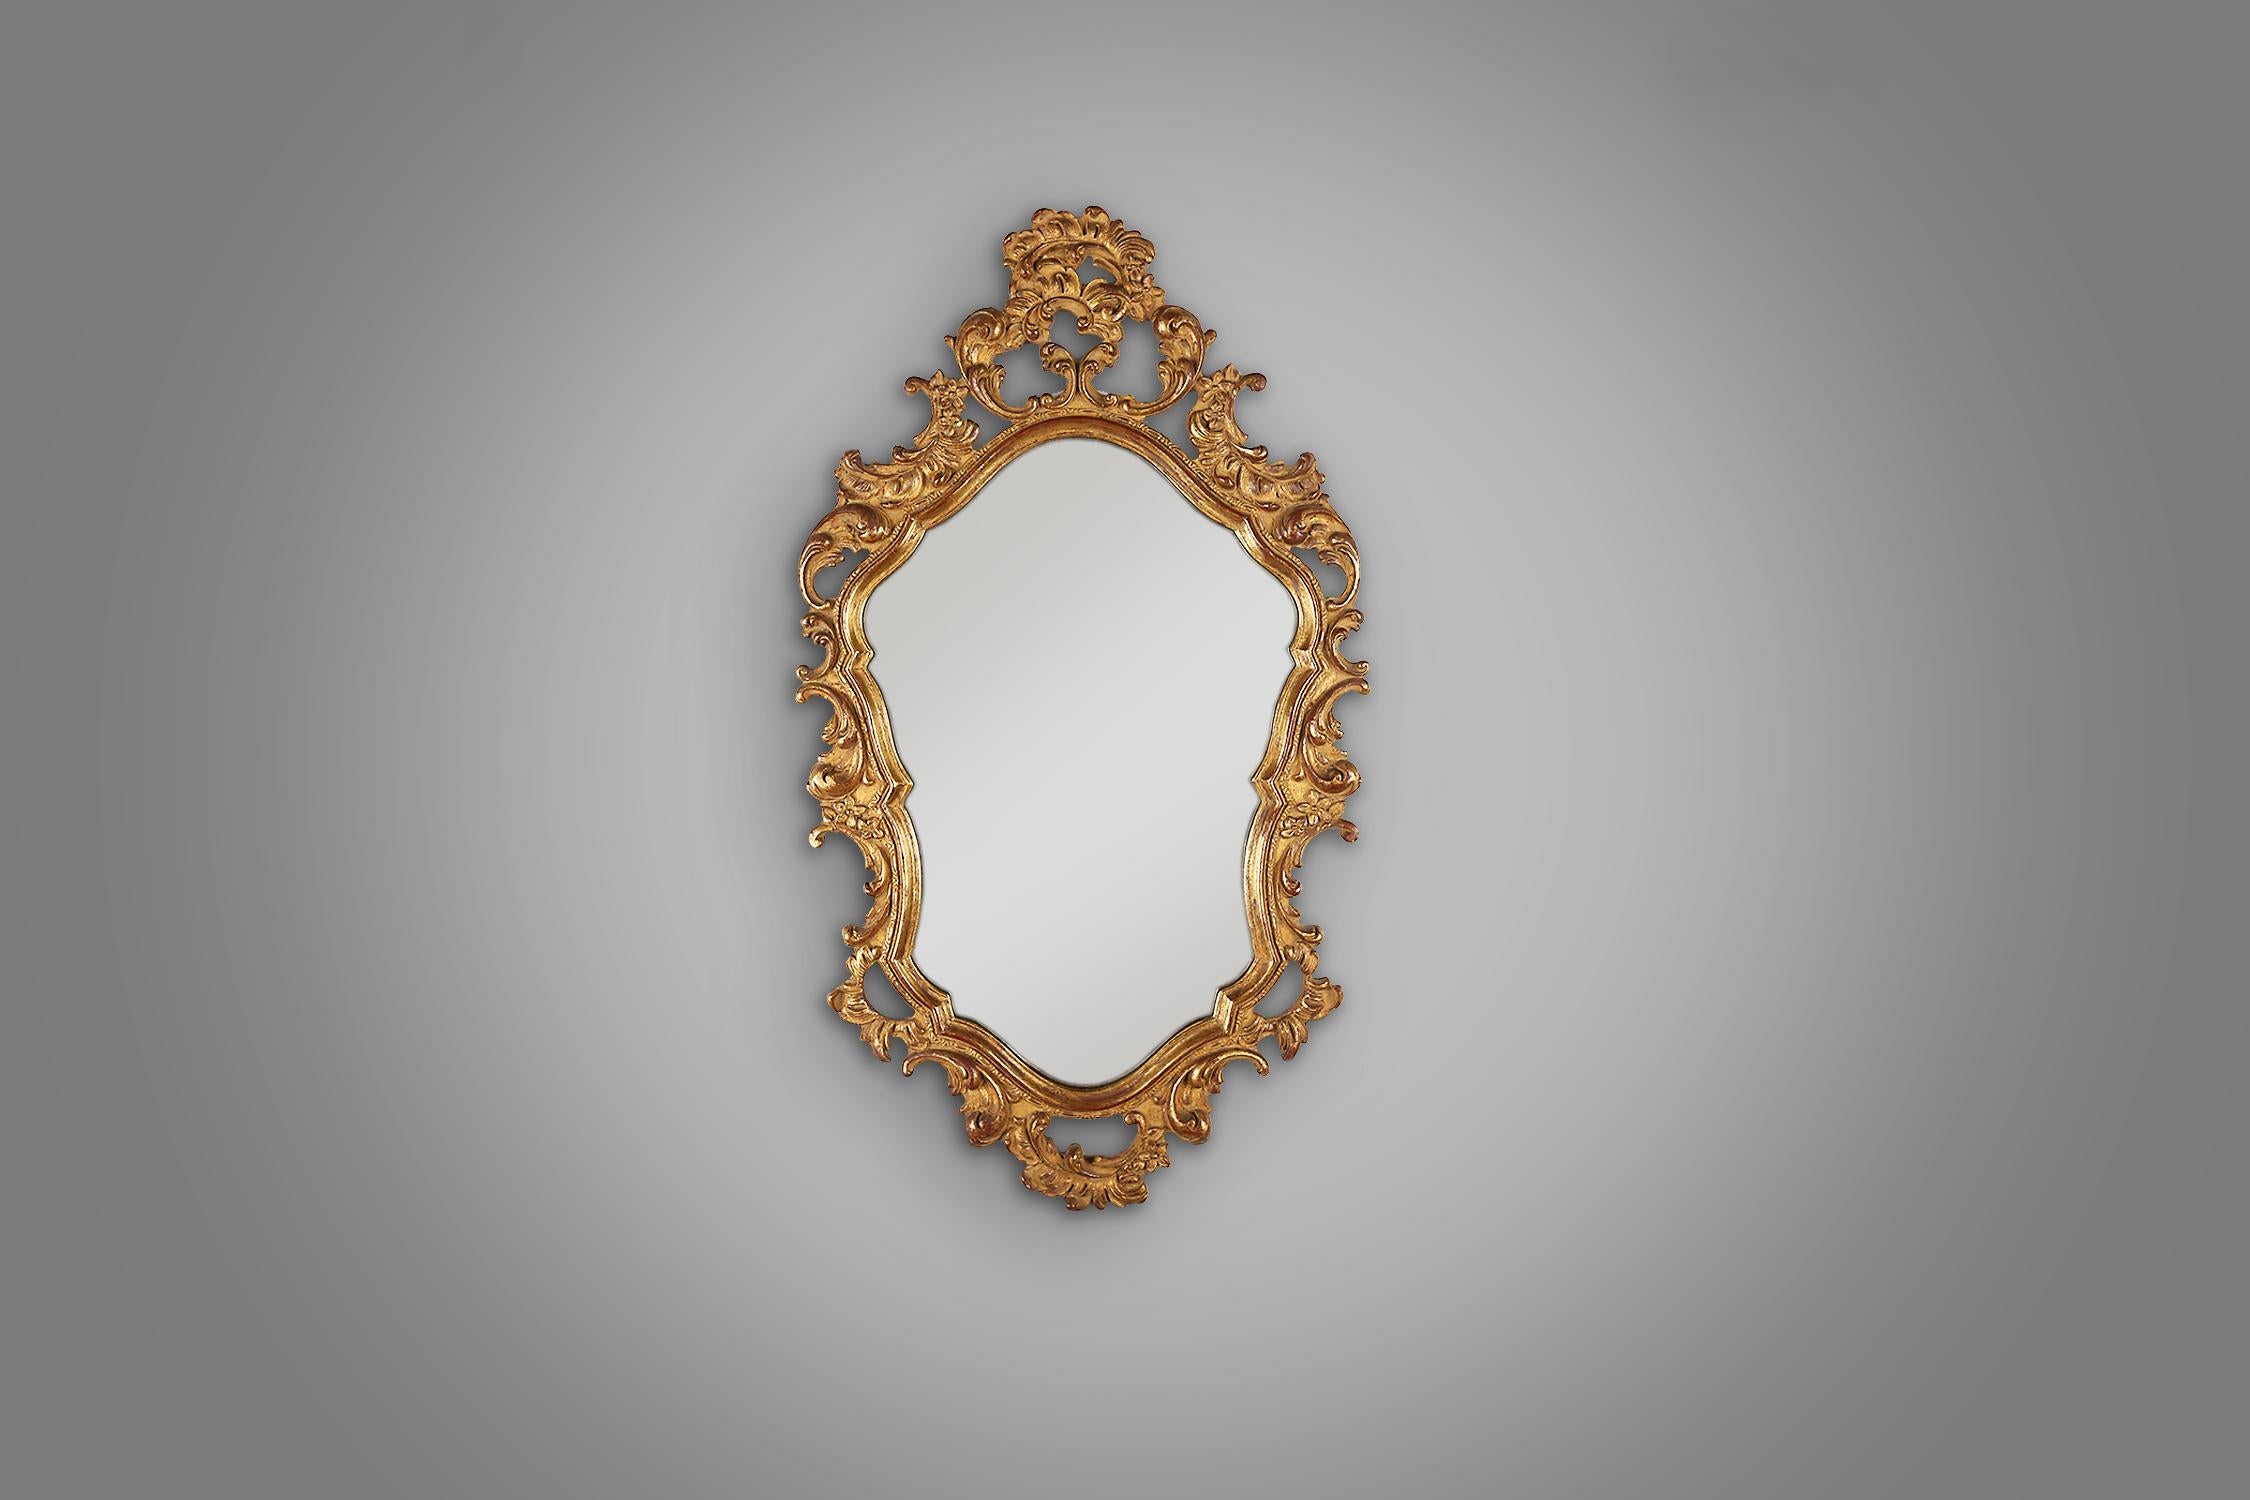 Belgium / 1950s / Mirror with stand and original label / wood and gold leaf / Antique / baroque / rococo 

Belgium classic baroque mirror with decorative golden frame and a matching stand to hang loose under the mirror. With original label from the